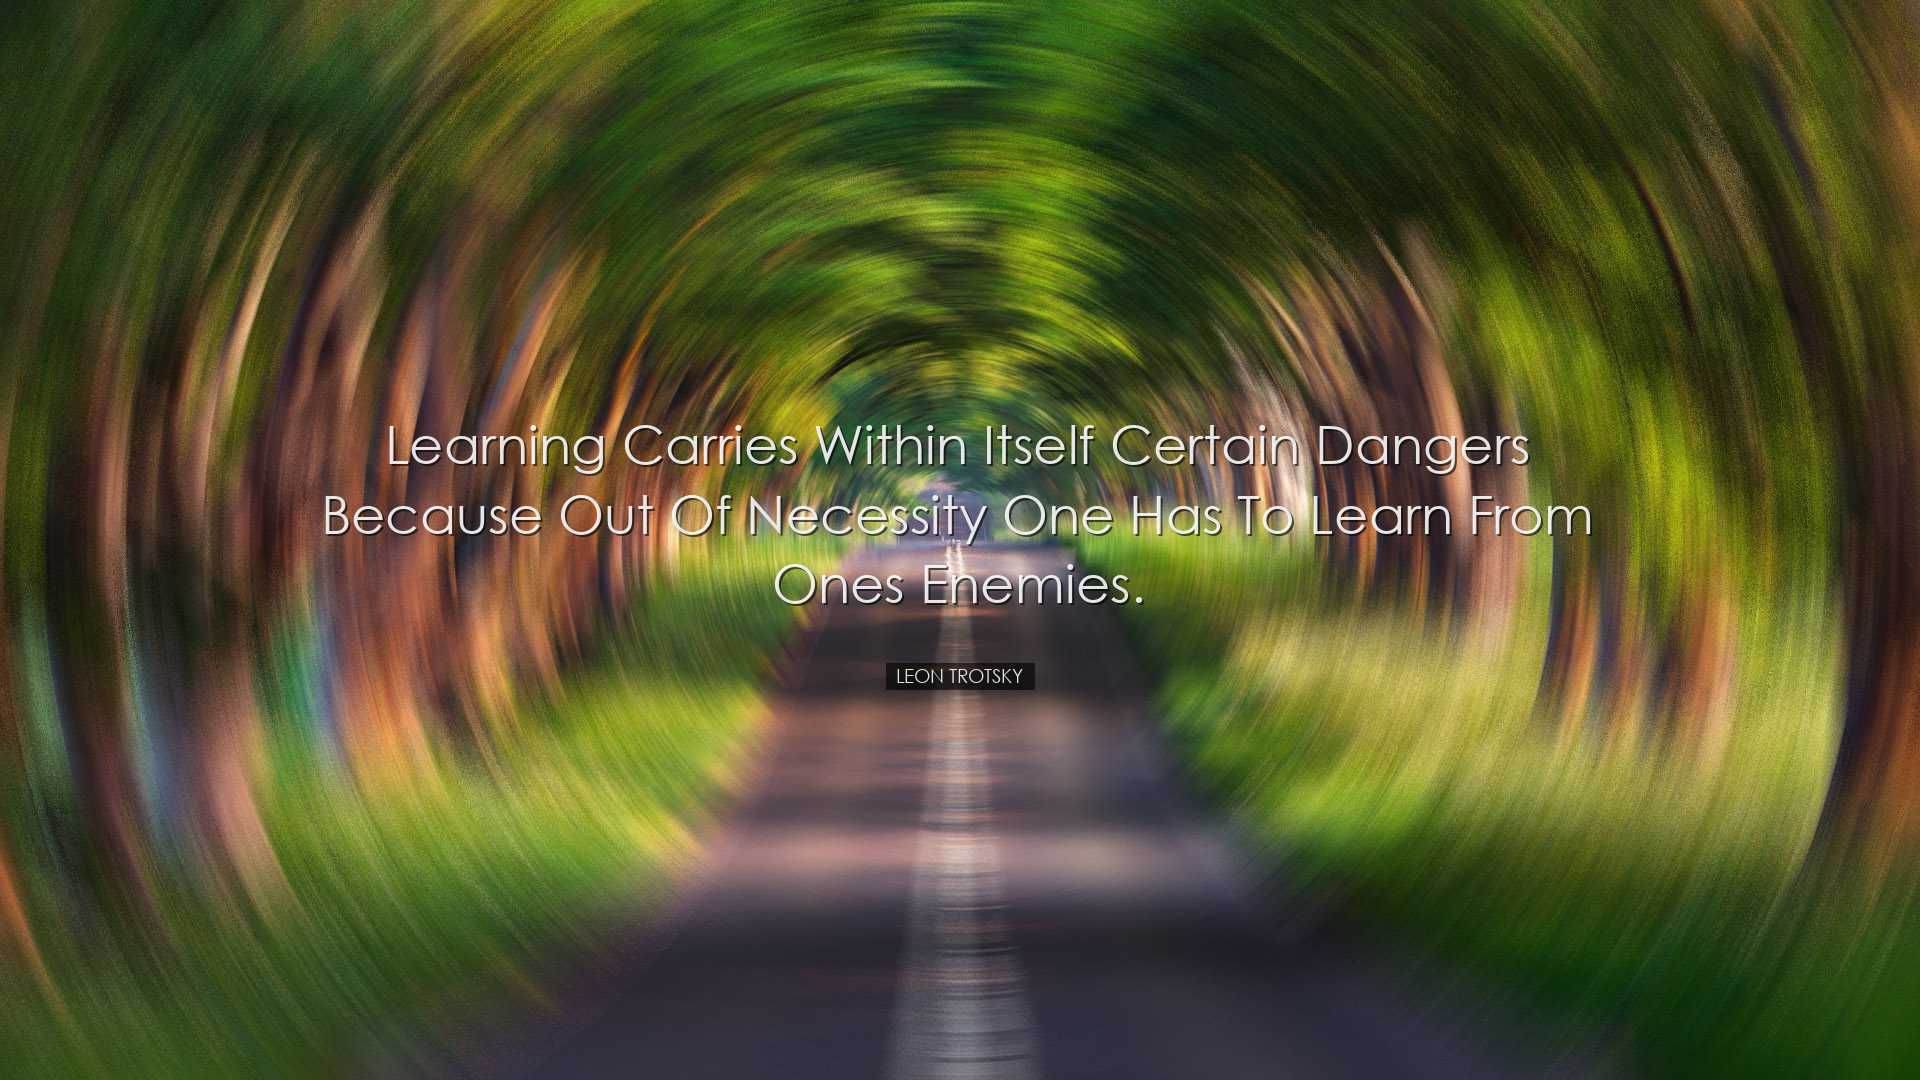 Learning carries within itself certain dangers because out of nece